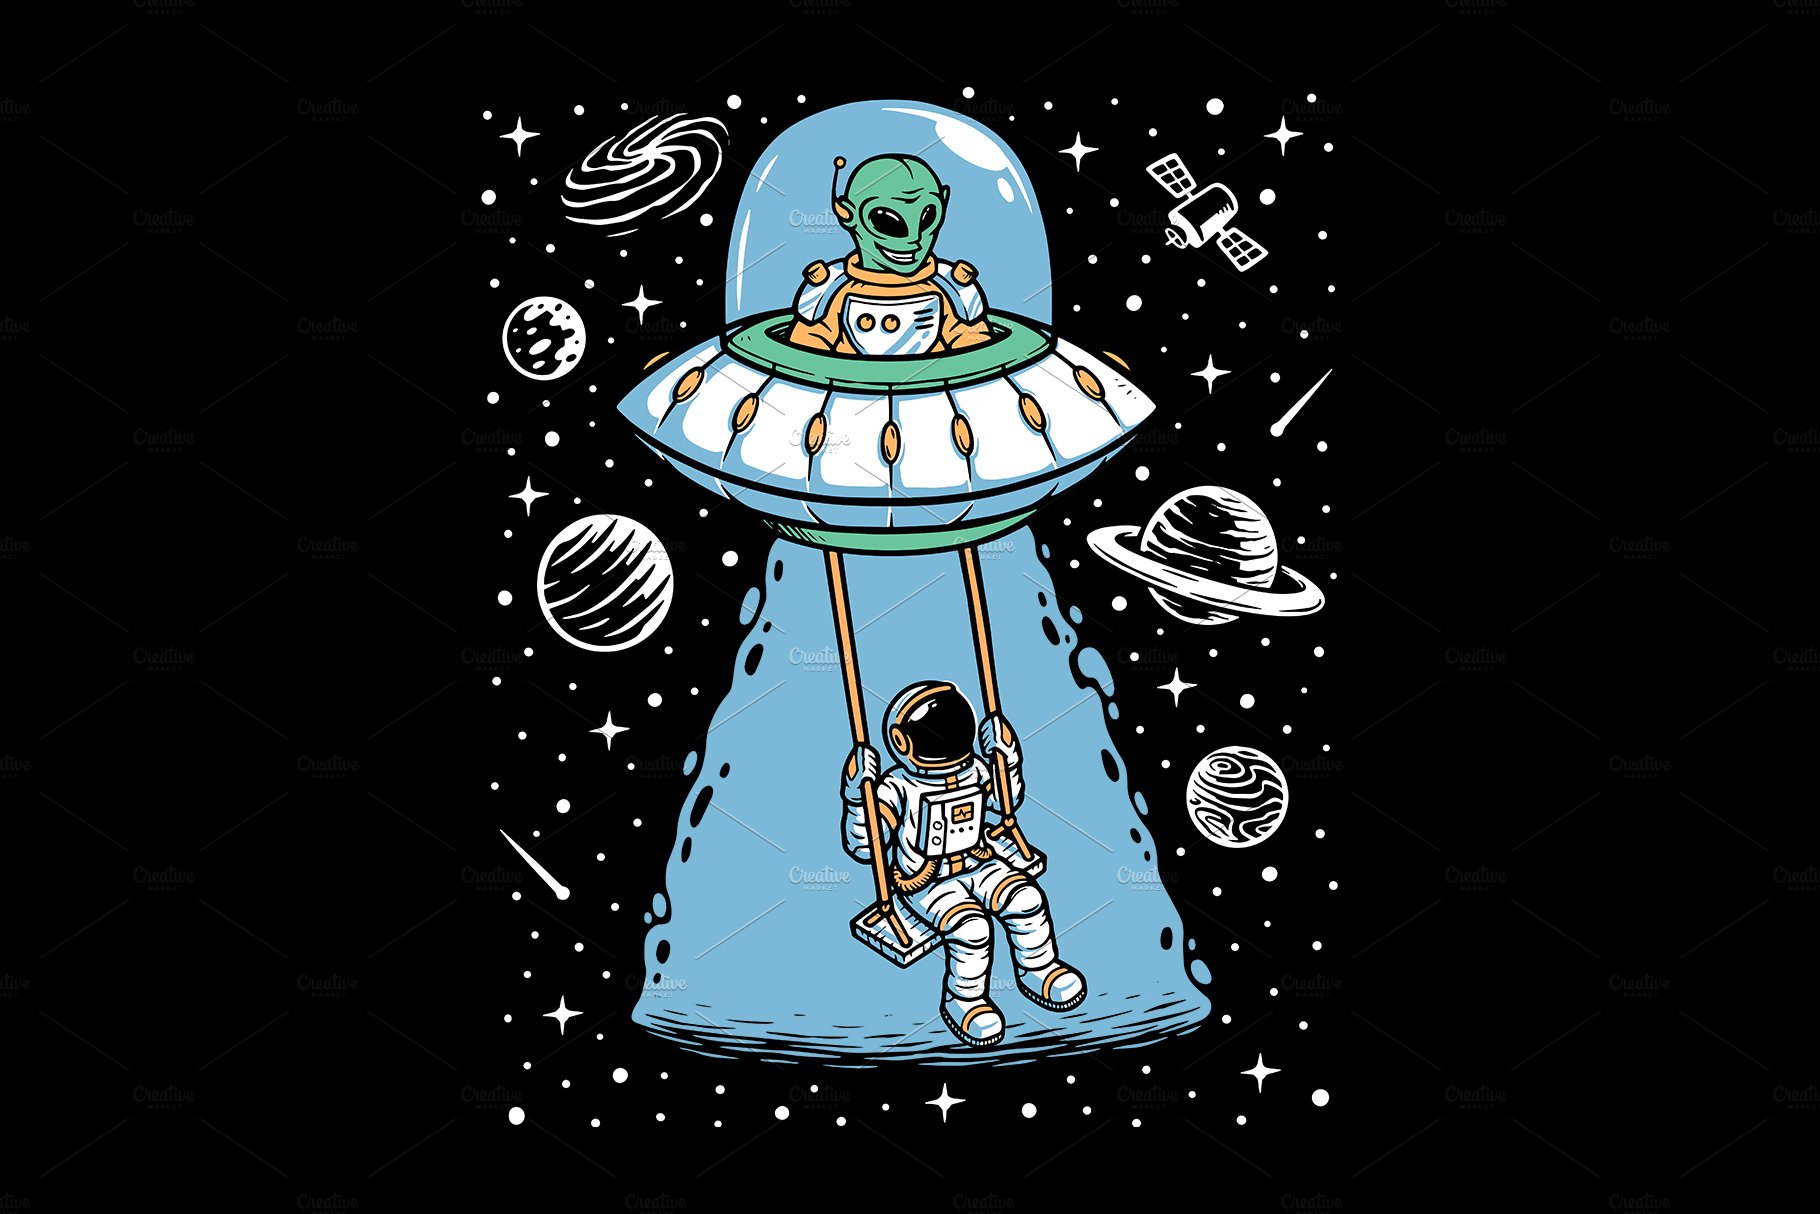 Astronaut and alien playing together cover image.